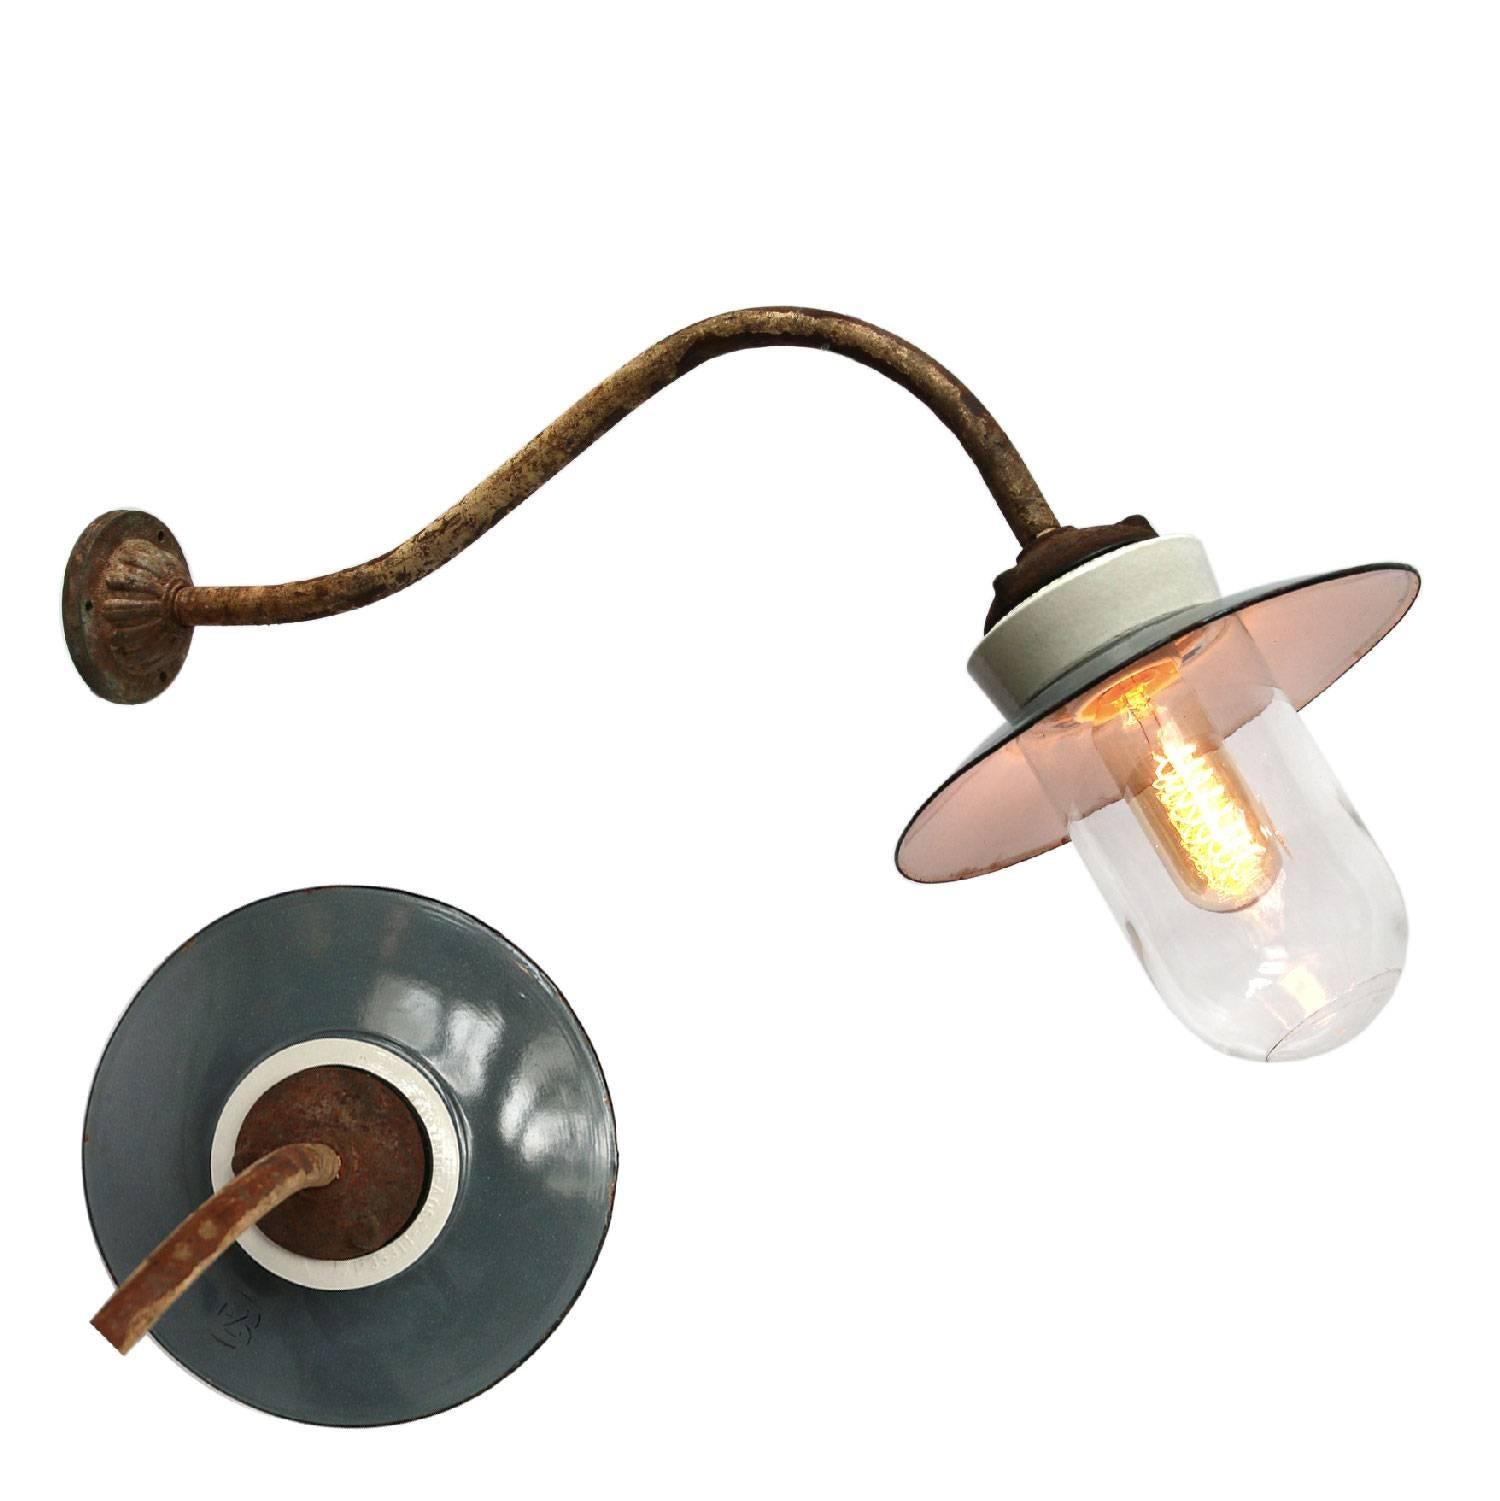 Gray/blue colored enamel industrial wall light with white interior.
Cast iron and porcelain top, clear glass.
Enamel shade available in multiple colors.
Diameter cast iron wall mount: 9 cm, 3 holes to secure.

All lamps have been made suitable